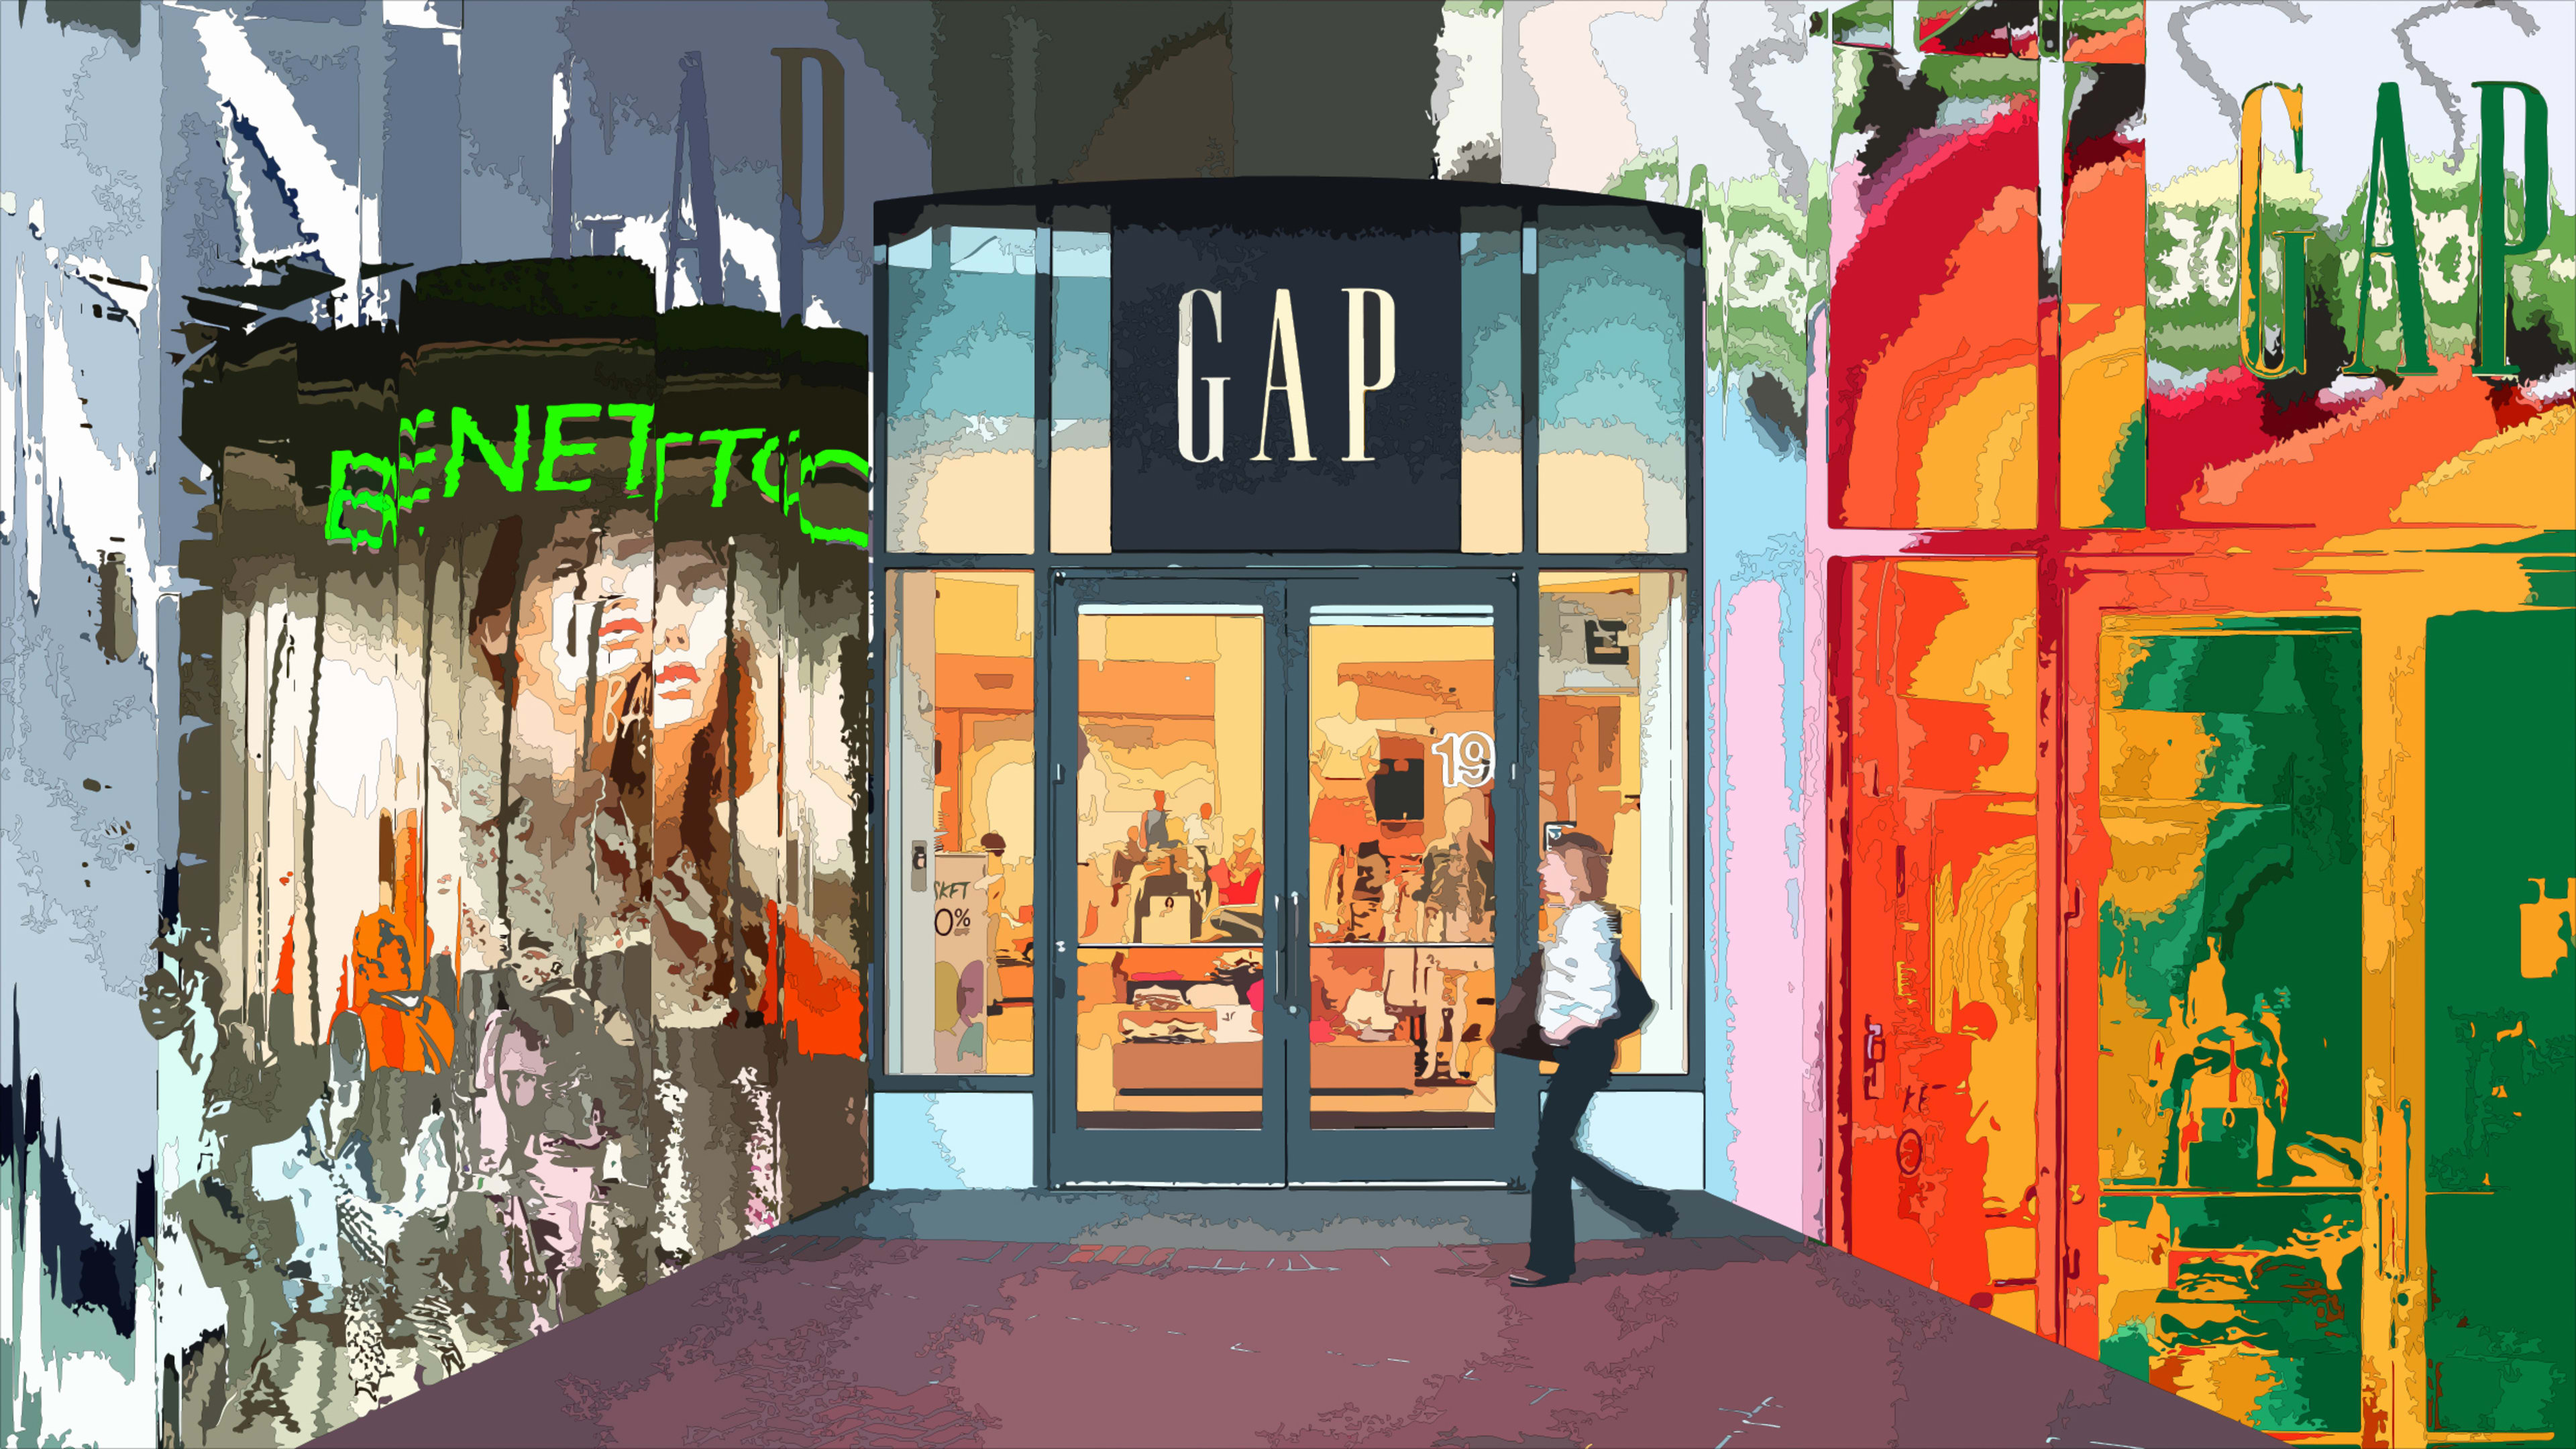 Gap and Benetton once ruled fashion—and their success ultimately led to their demise